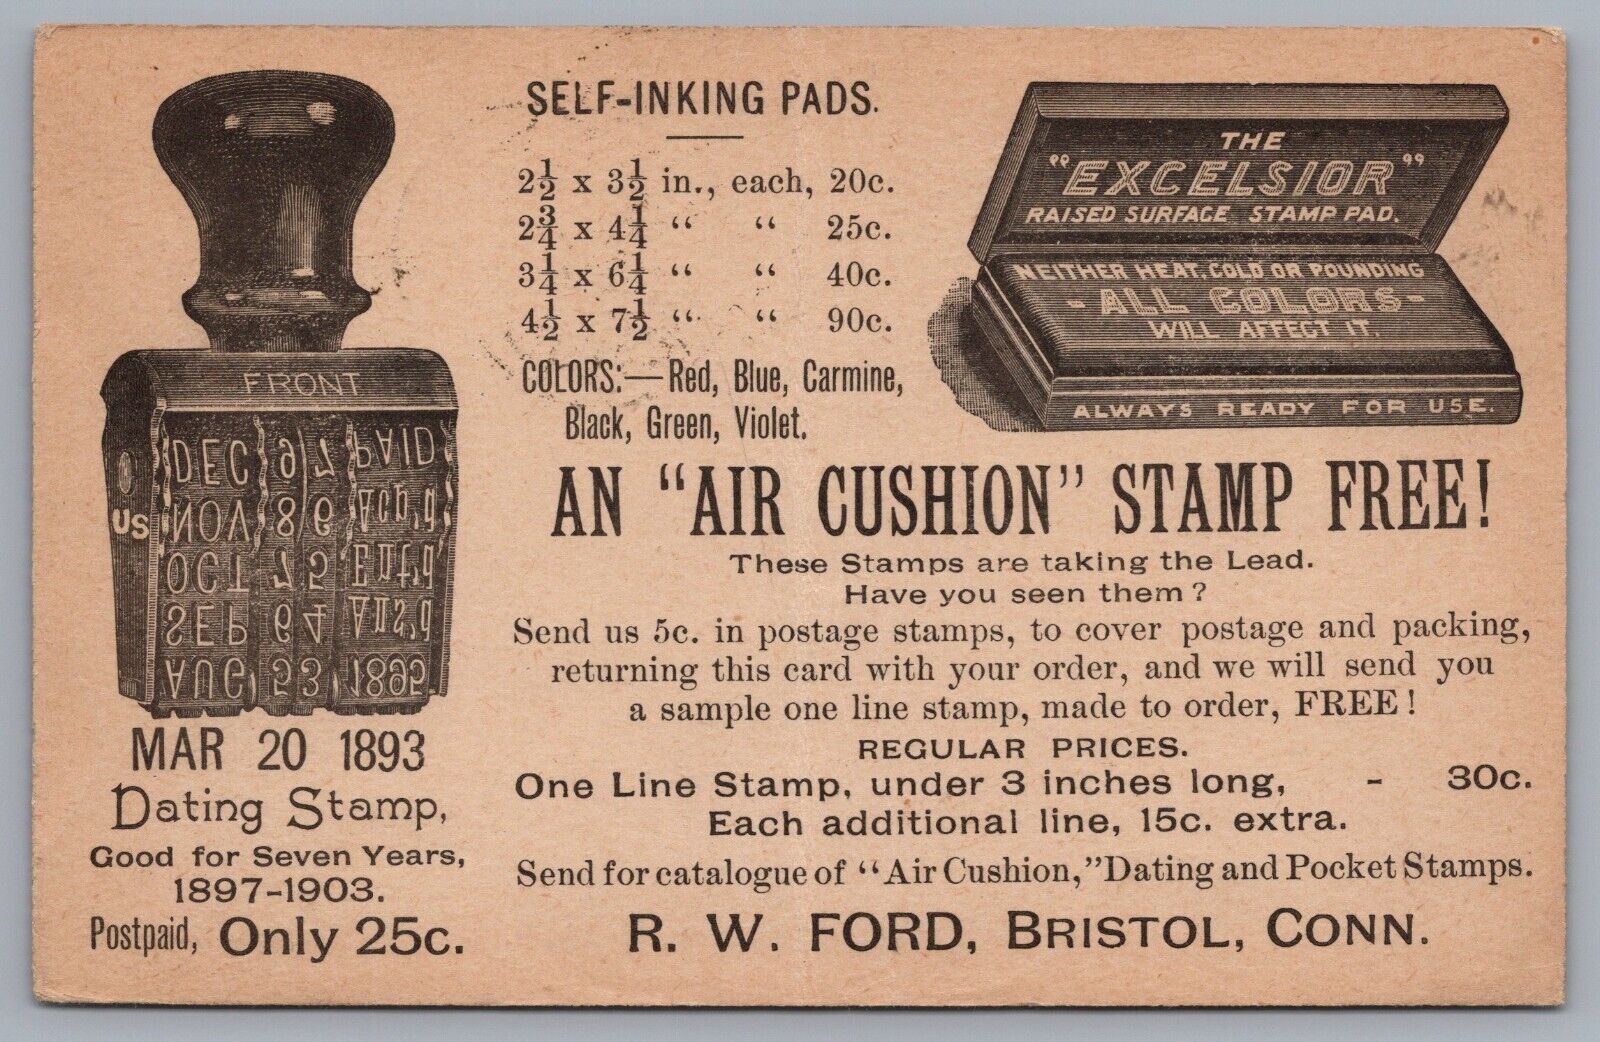 Free Air Cushion Date Stamp Excelsior Self-Inking Pad Advertising Postcard